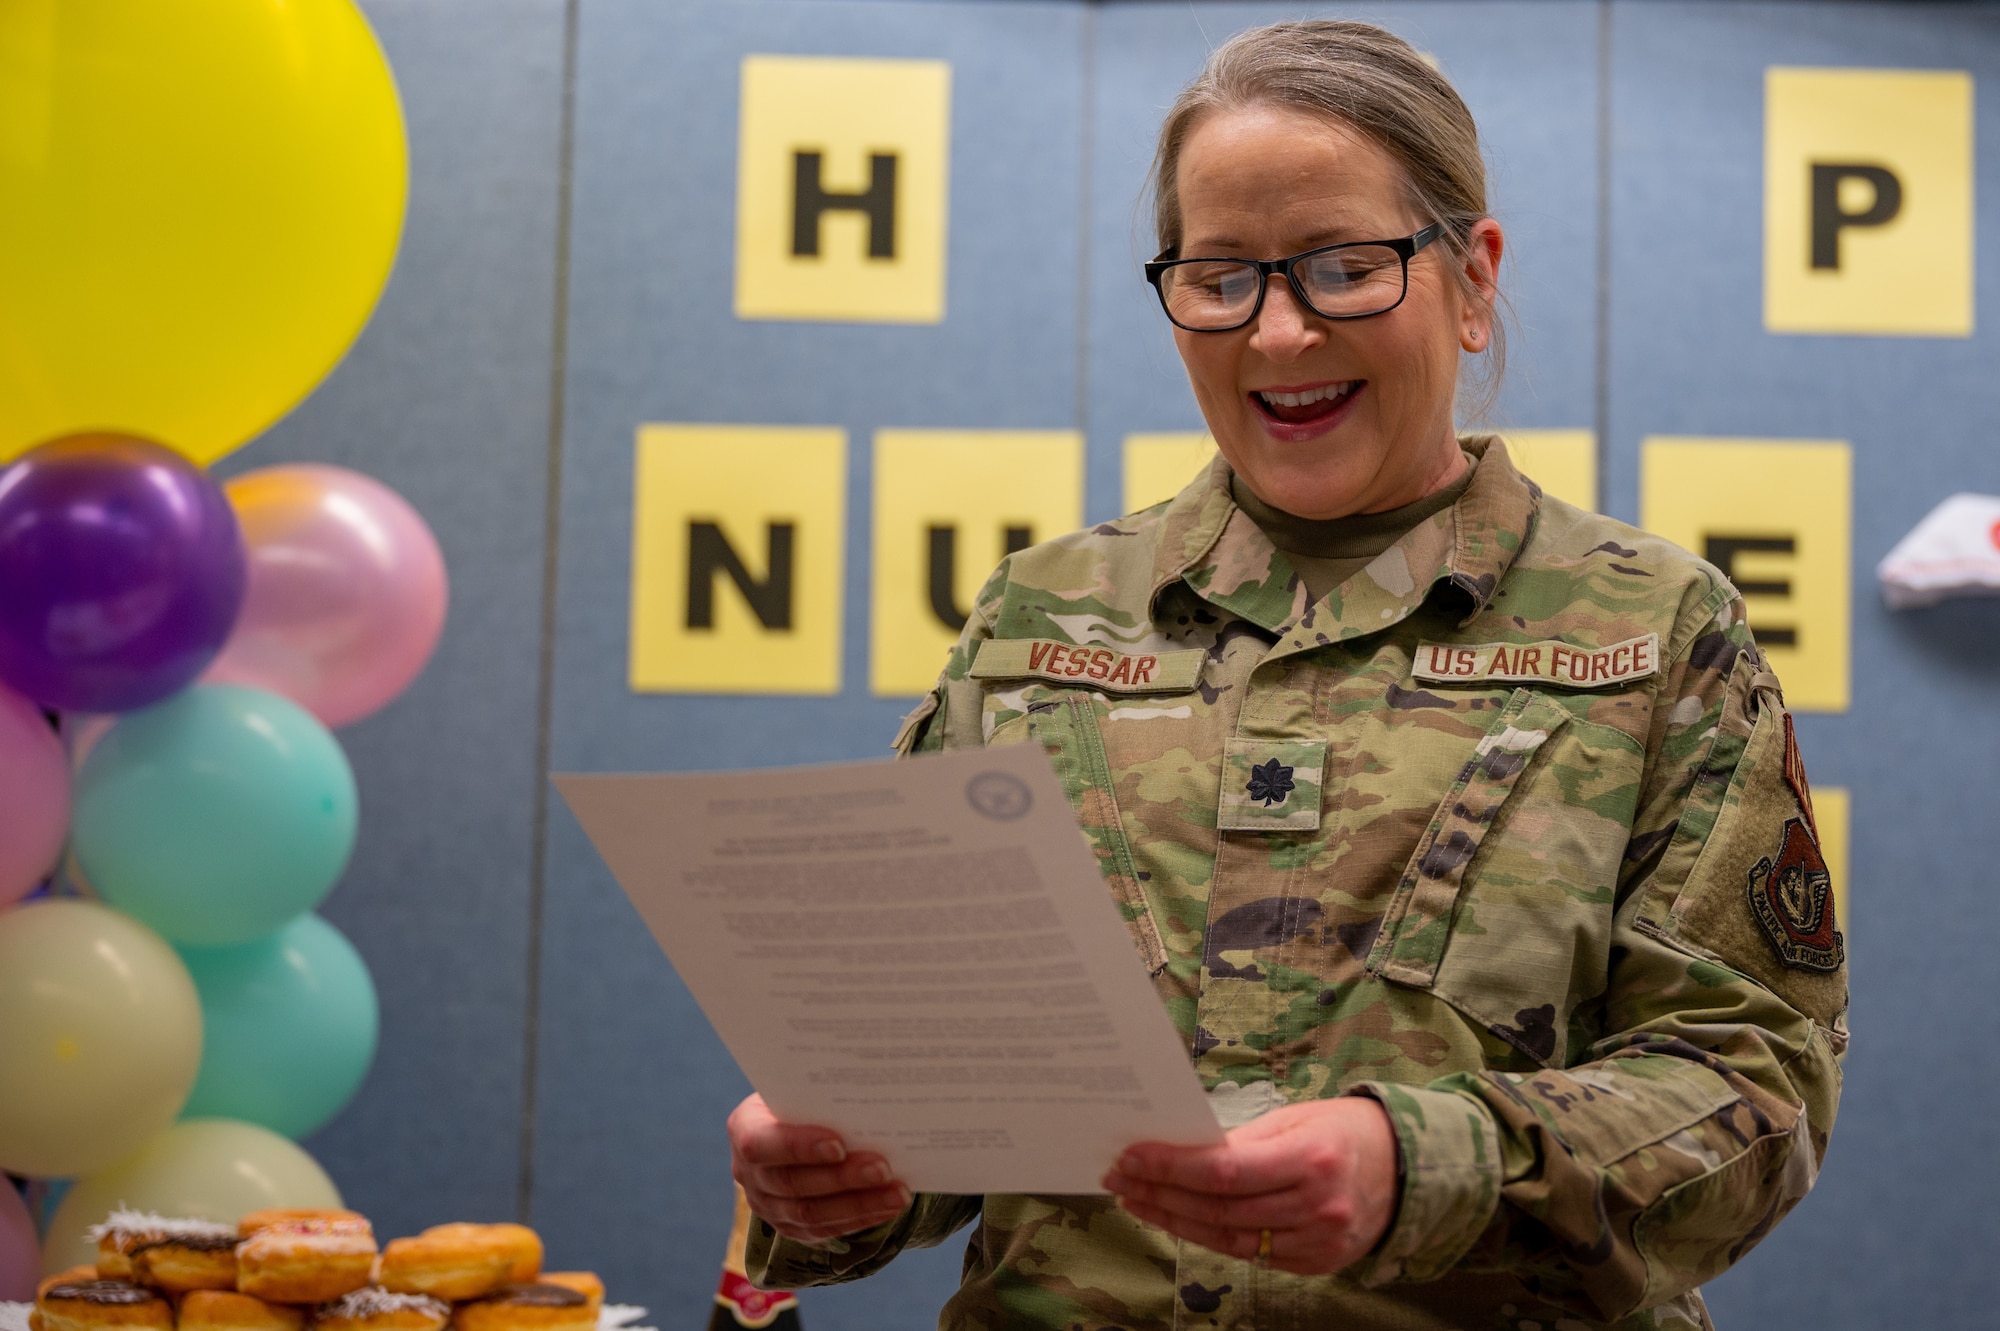 Lt. Col. Melissa Vessar, 51st Medical Group chief nurse, smiles while reading the proclamation memorandum in honor of National Nurses and Technician